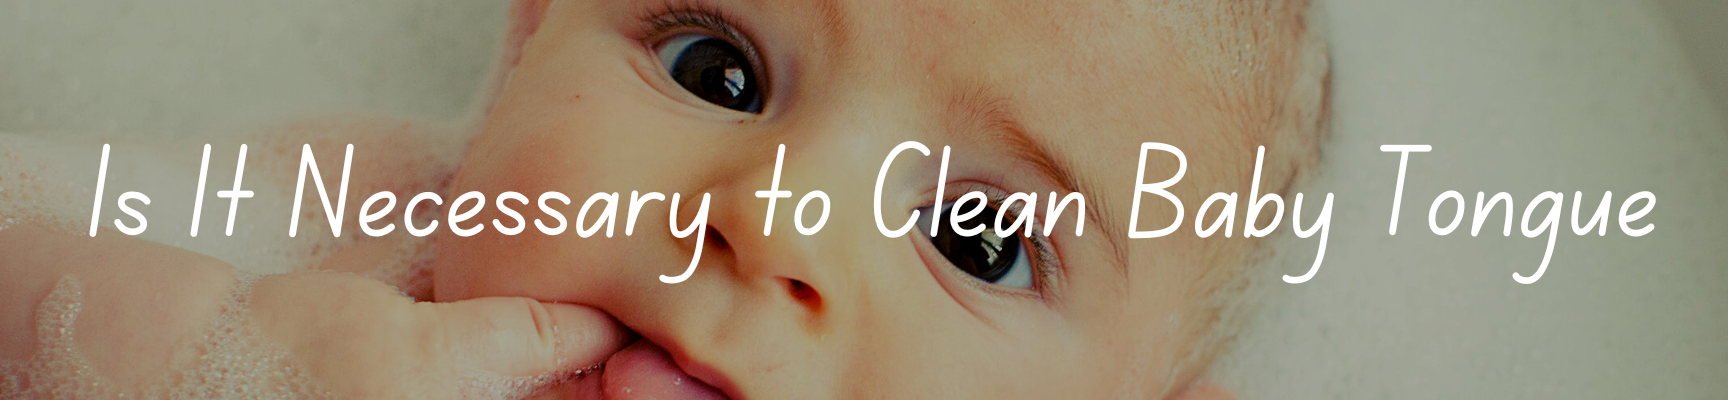 Is It Necessary to Clean Baby Tongue